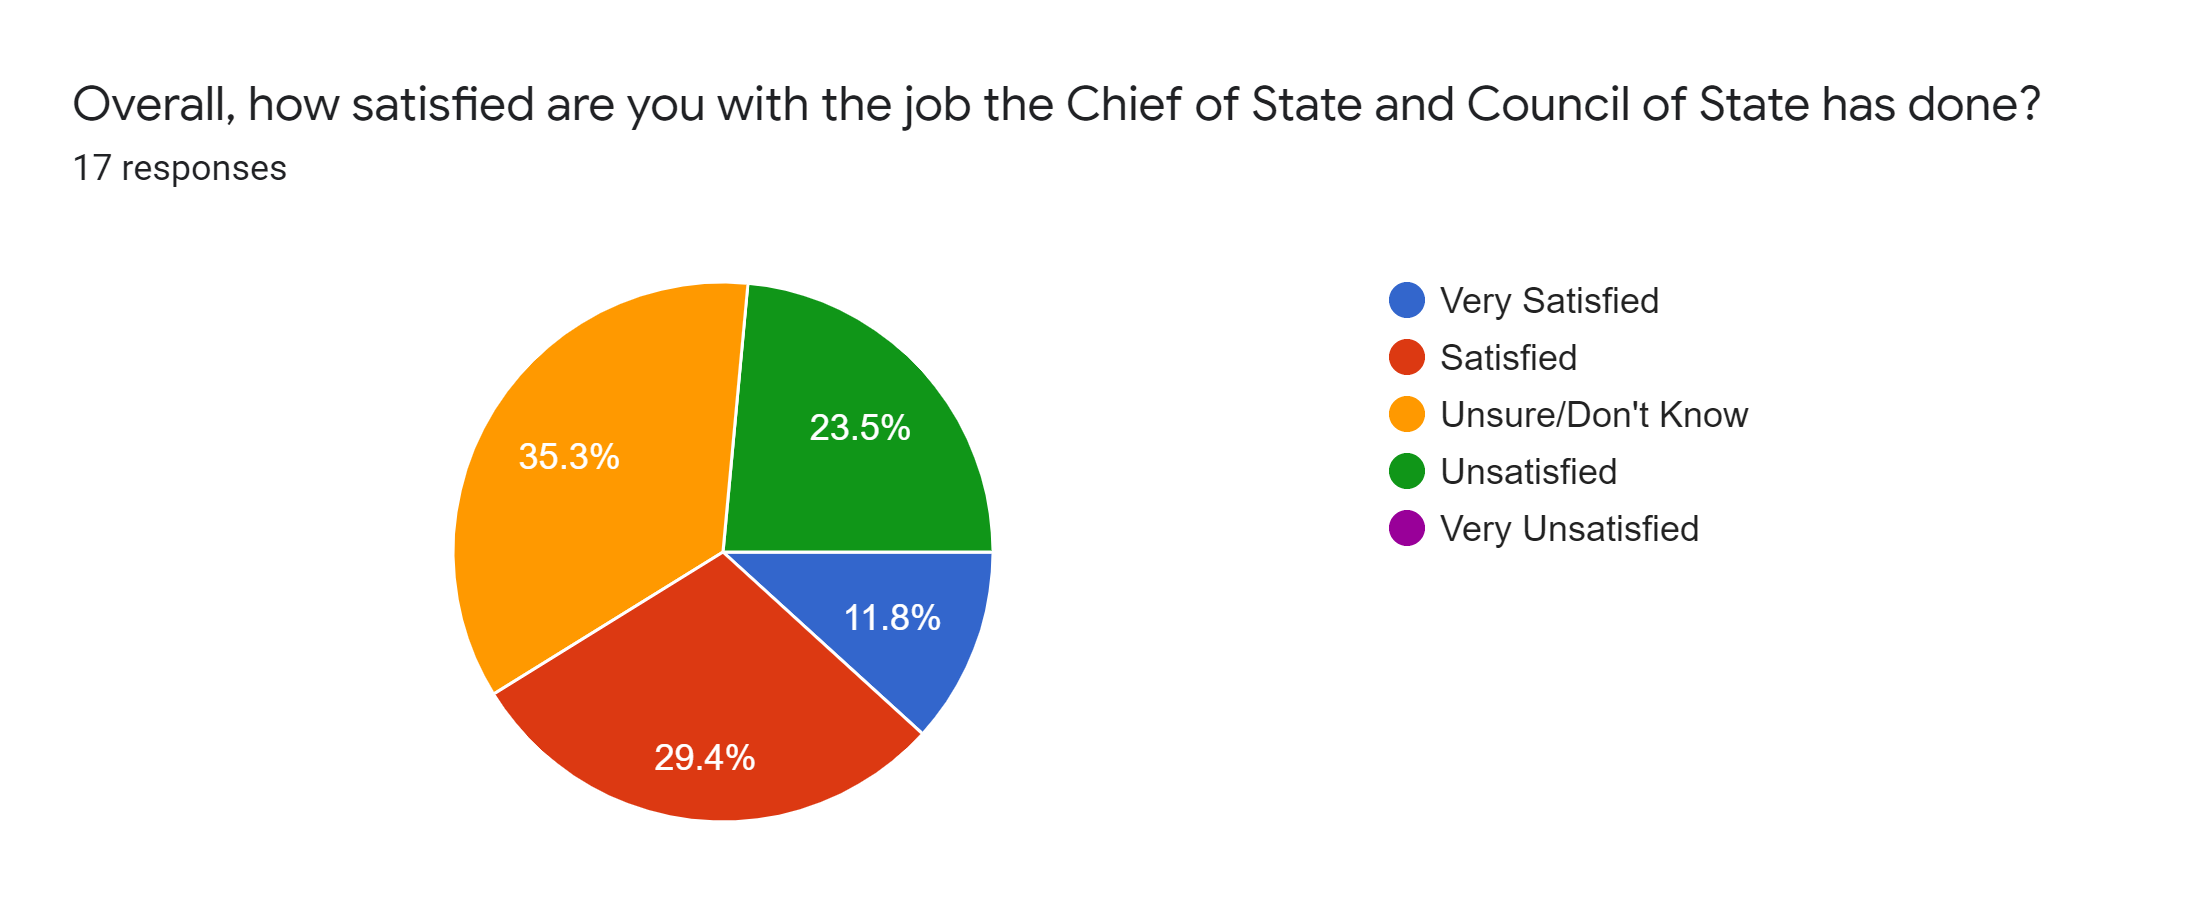 Forms response chart. Question title: Overall, how satisfied are you with the job the Chief of State and Council of State has done?. Number of responses: 17 responses.